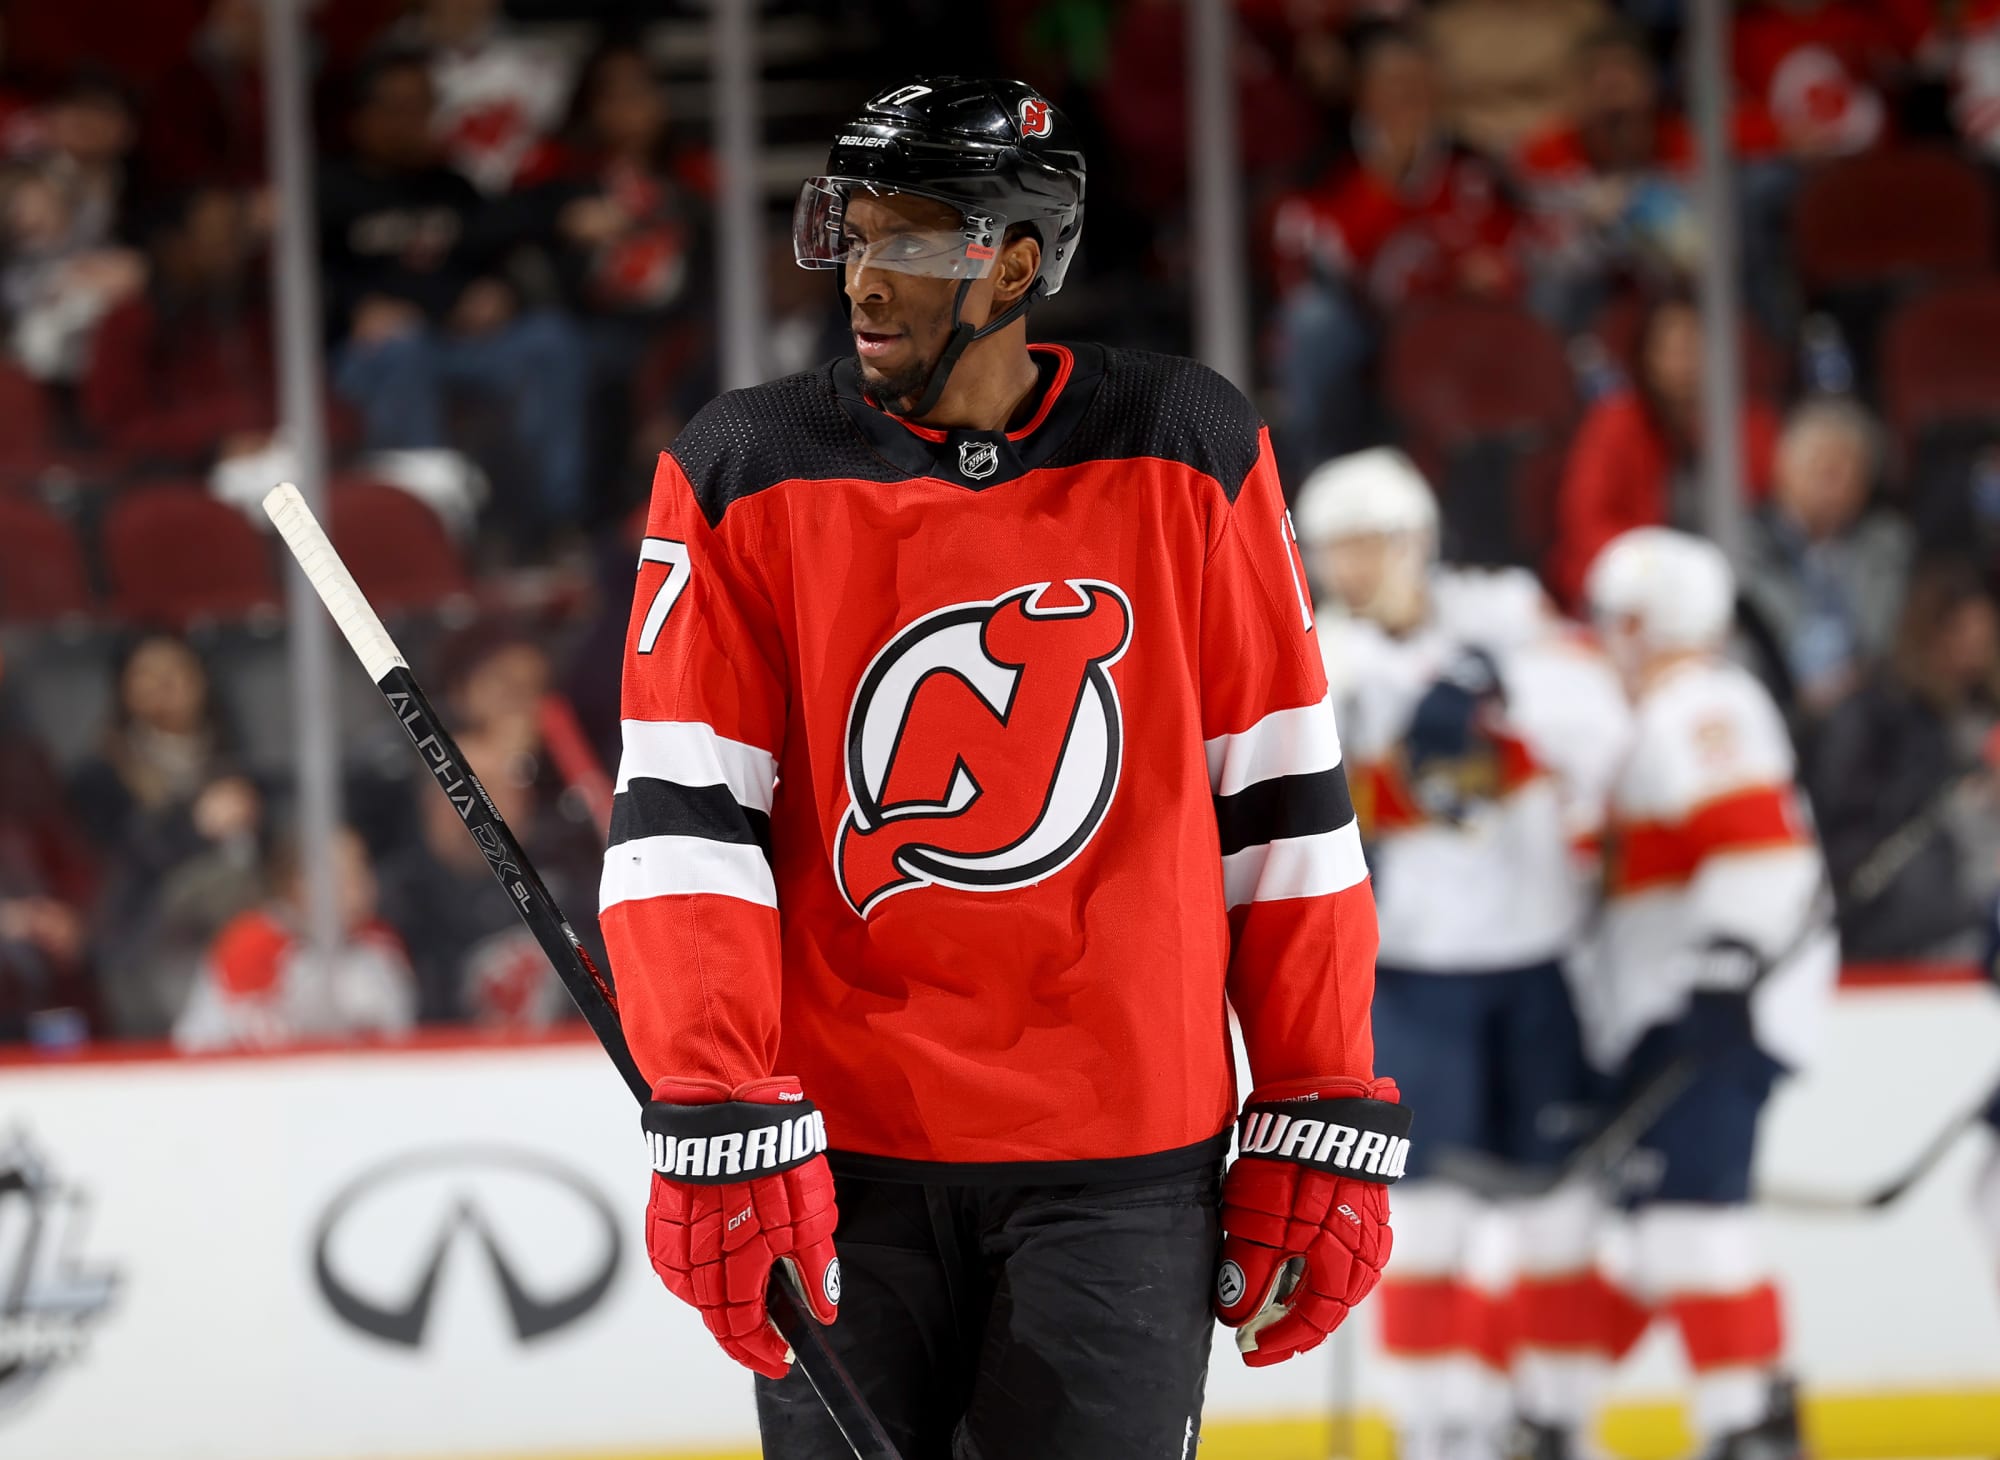 Former Flyer Wayne Simmonds signs with rival New Jersey Devils